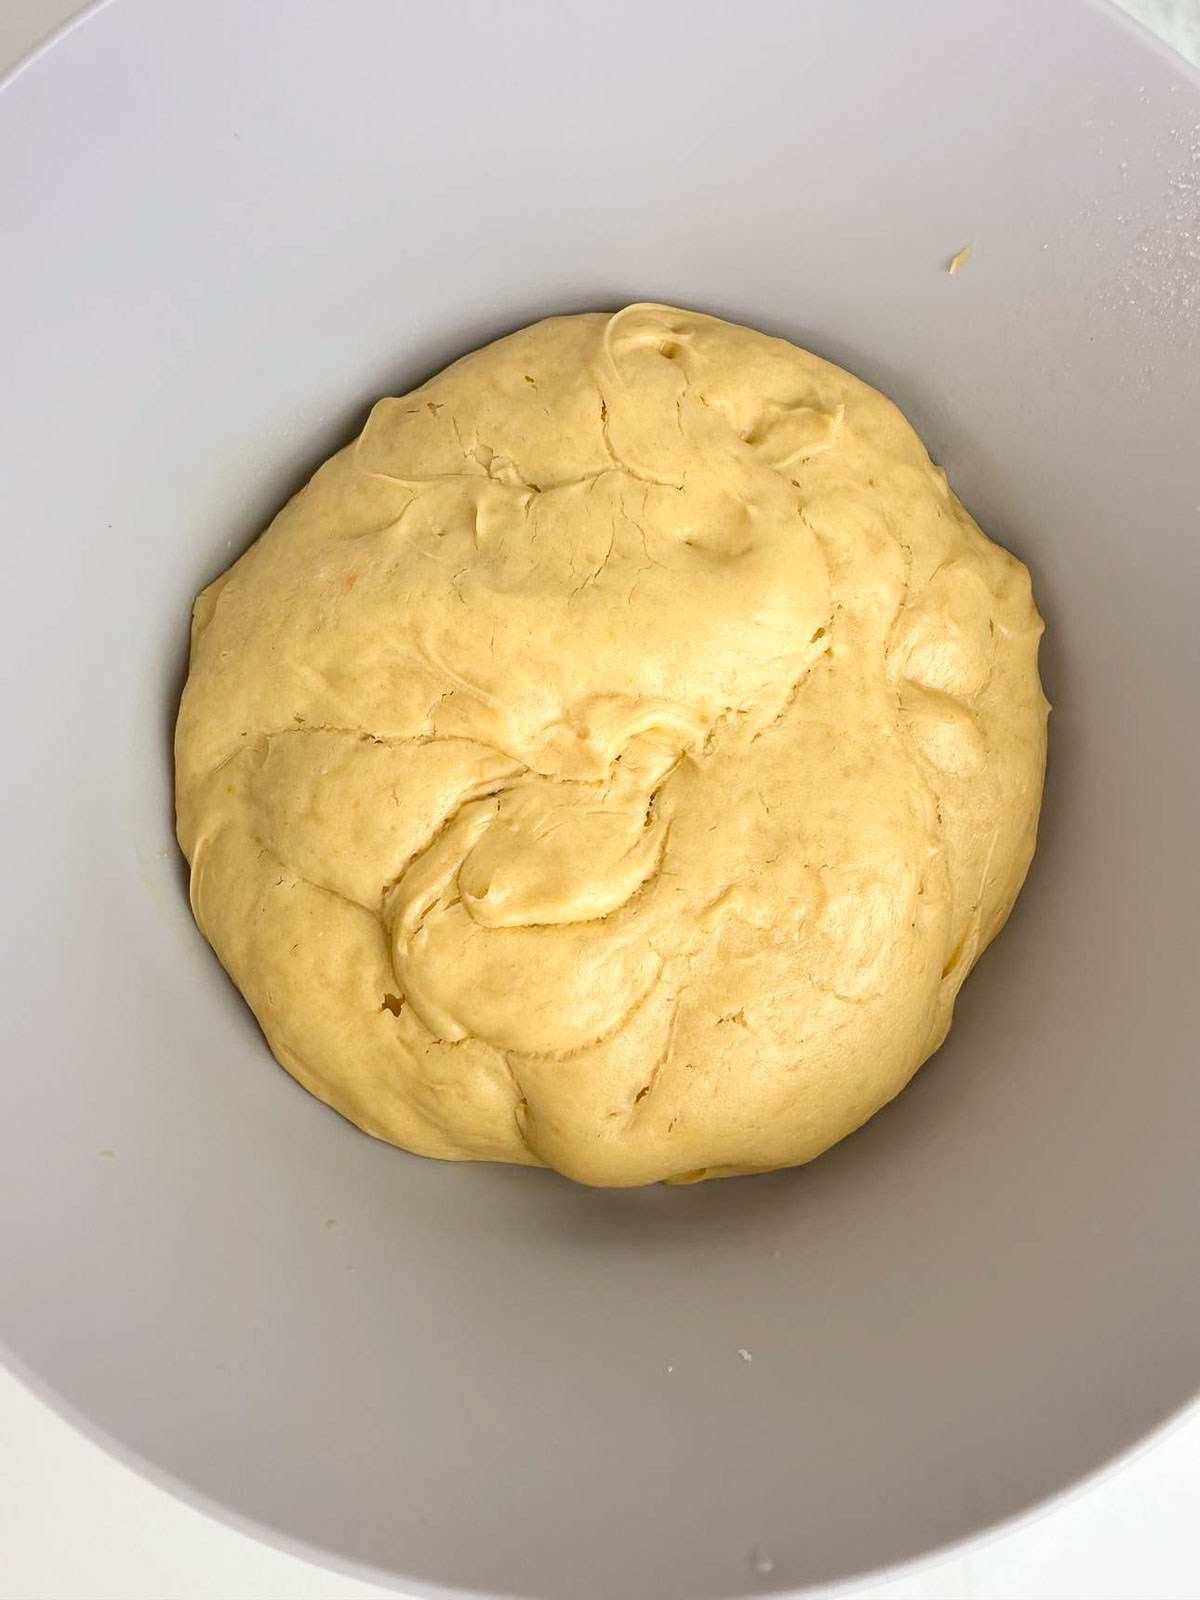 The Italian Easter bread dough after beating in the butter and letting it rise a second time.